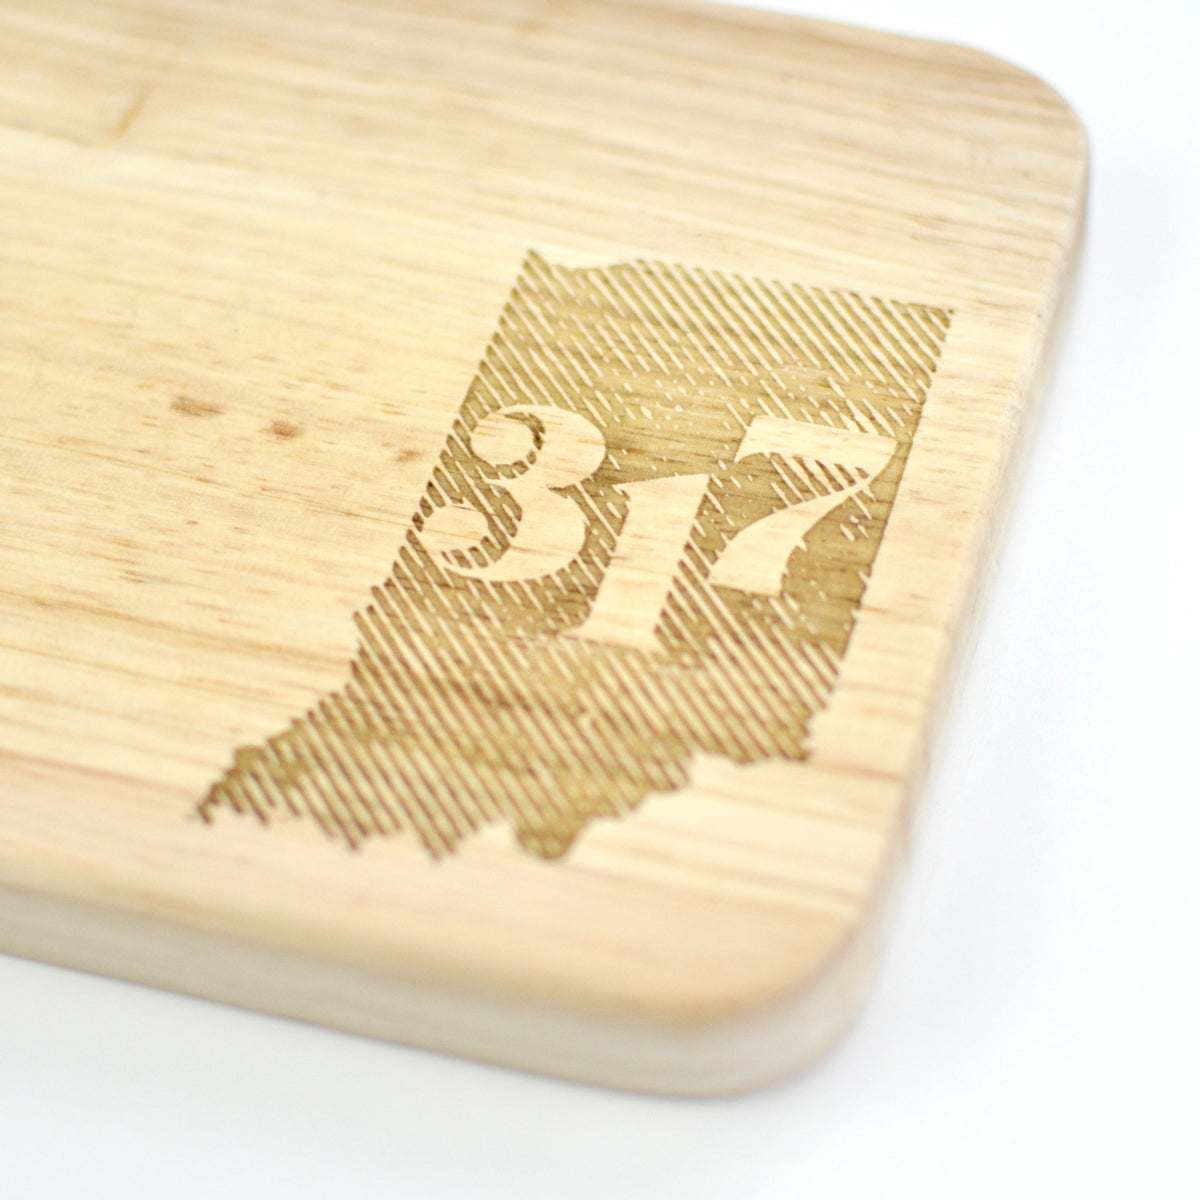 Small Home State Serving Board Customized by You!